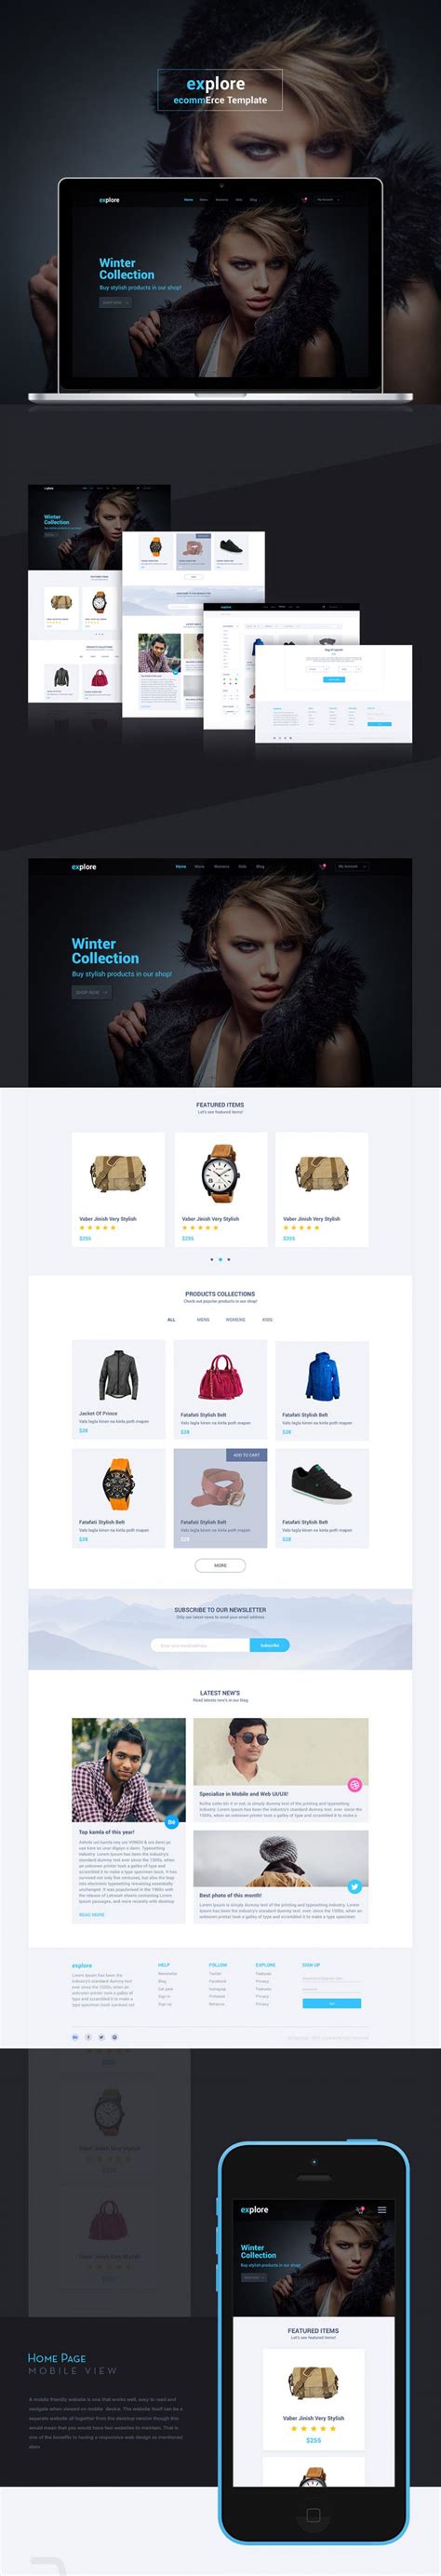 Simple Ecommerce Website Templates Free Psd Set Download Psd